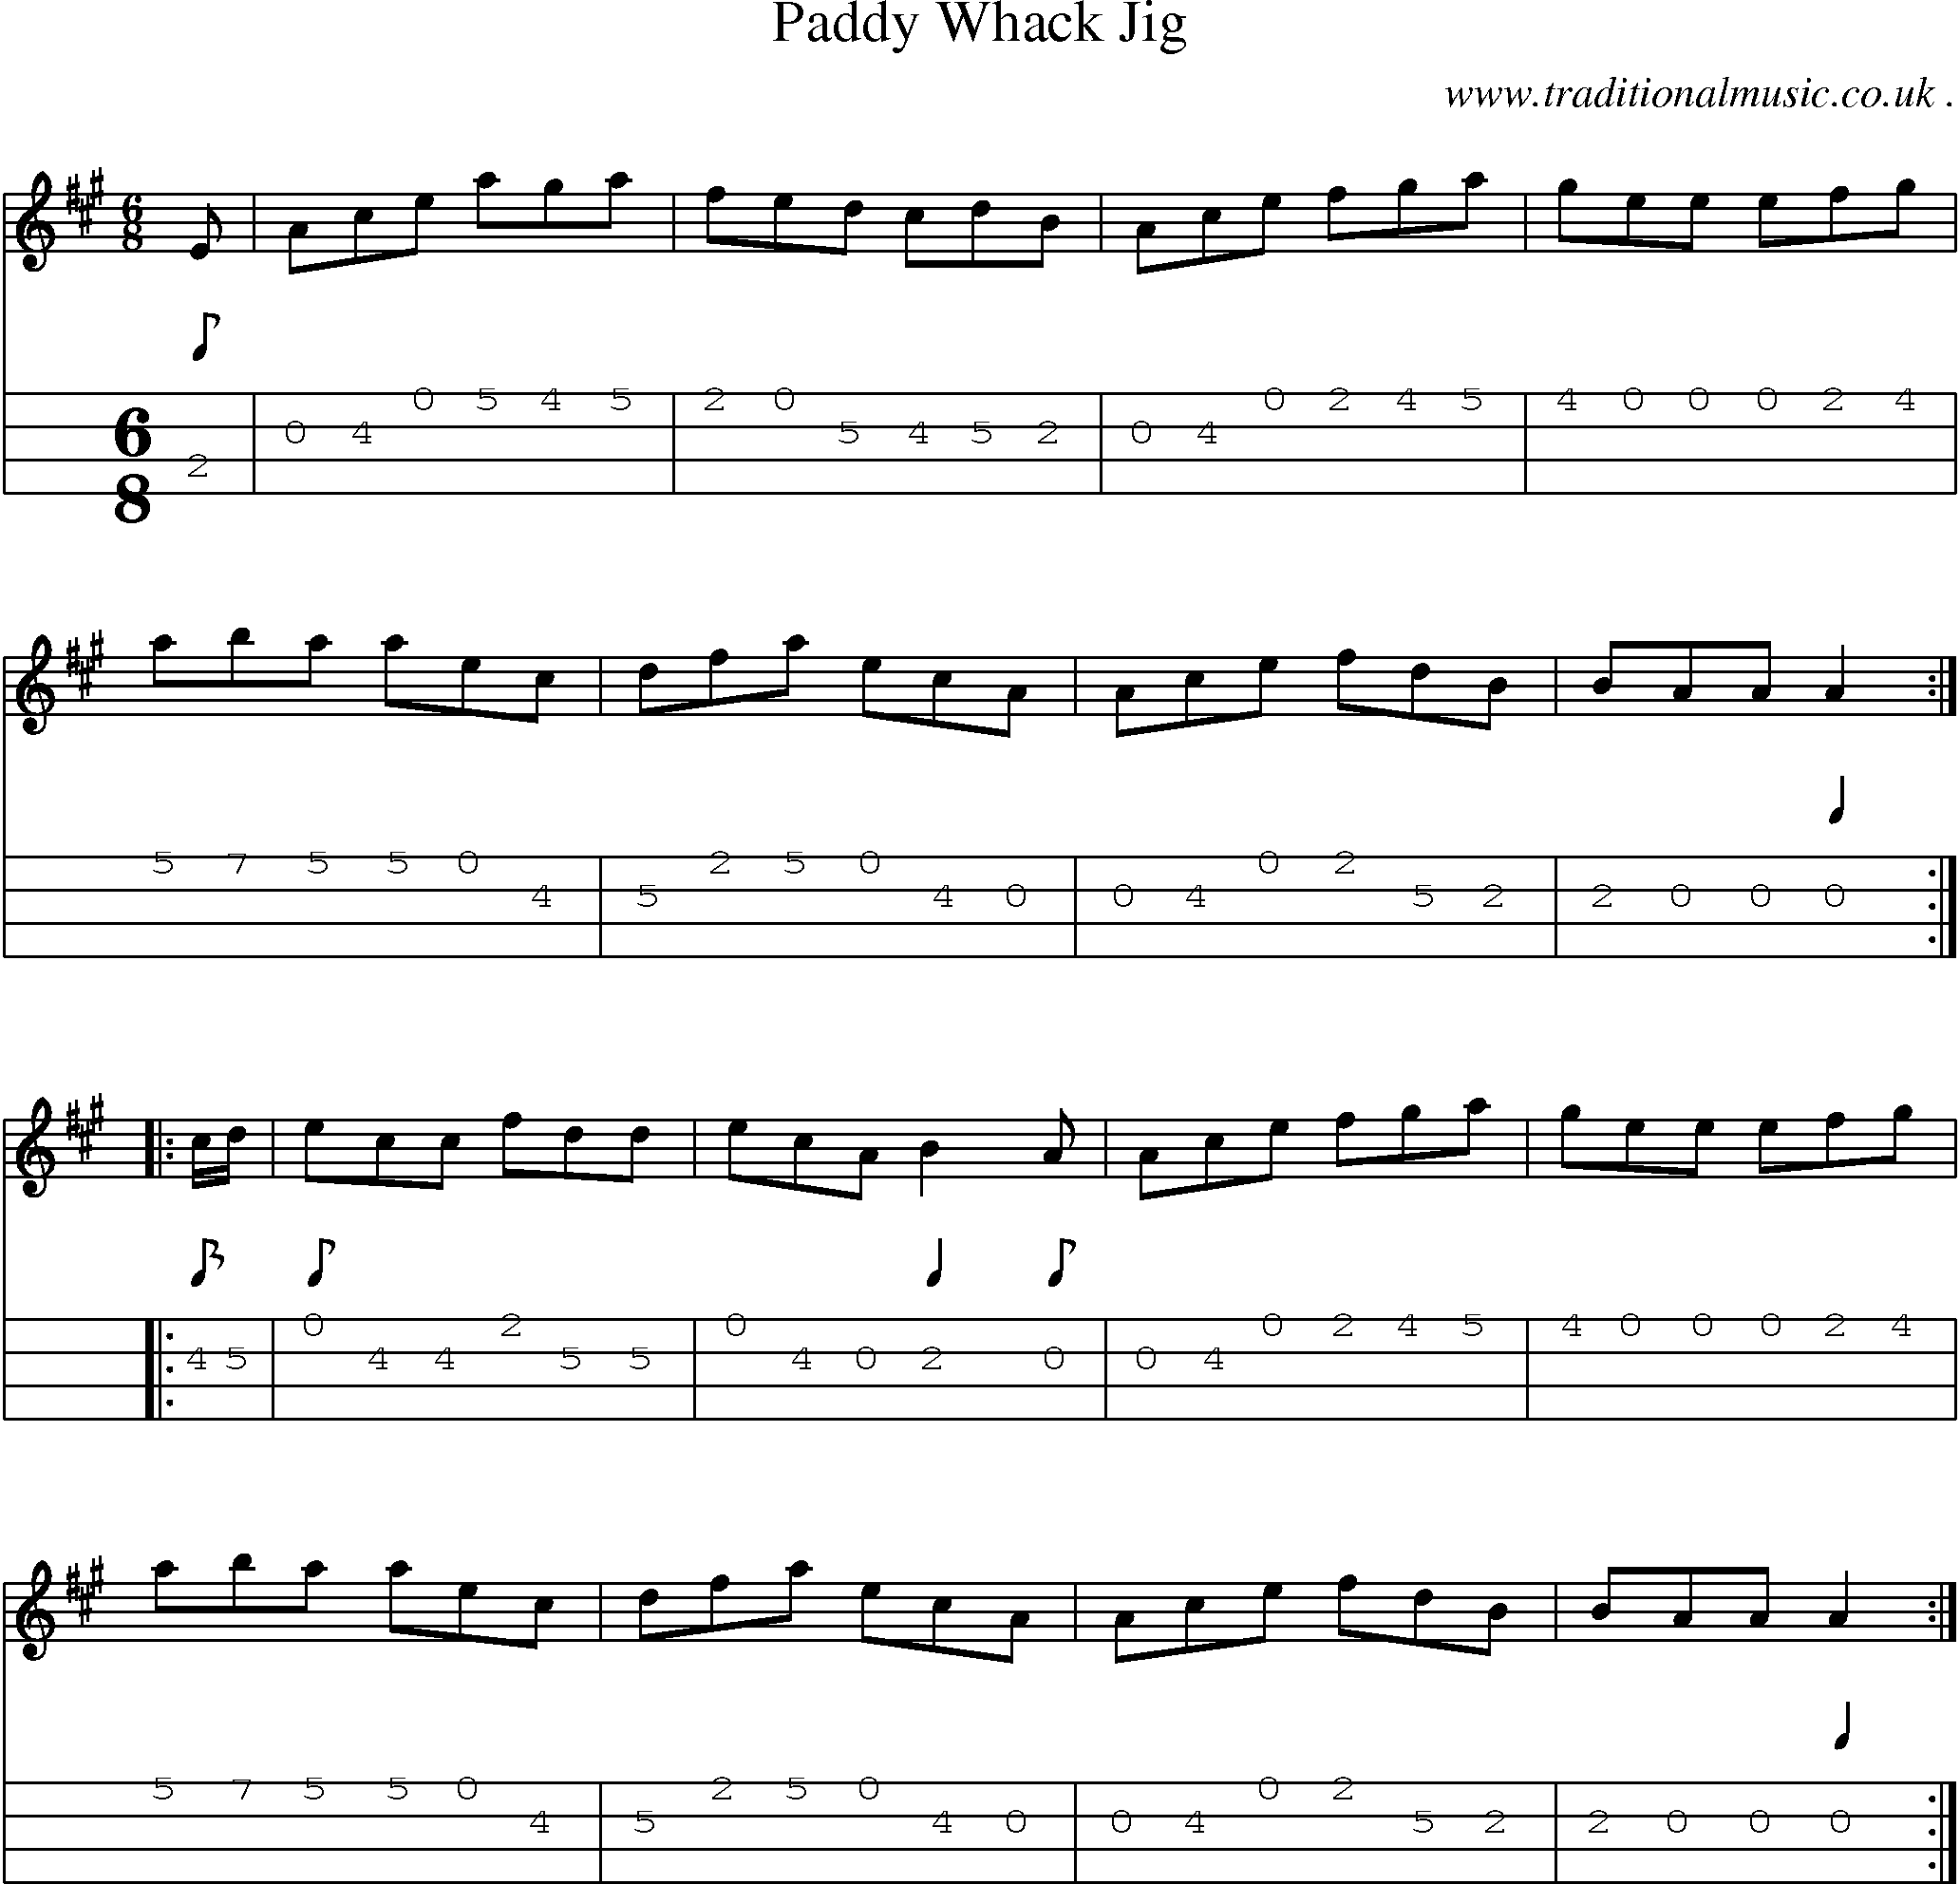 Sheet-Music and Mandolin Tabs for Paddy Whack Jig